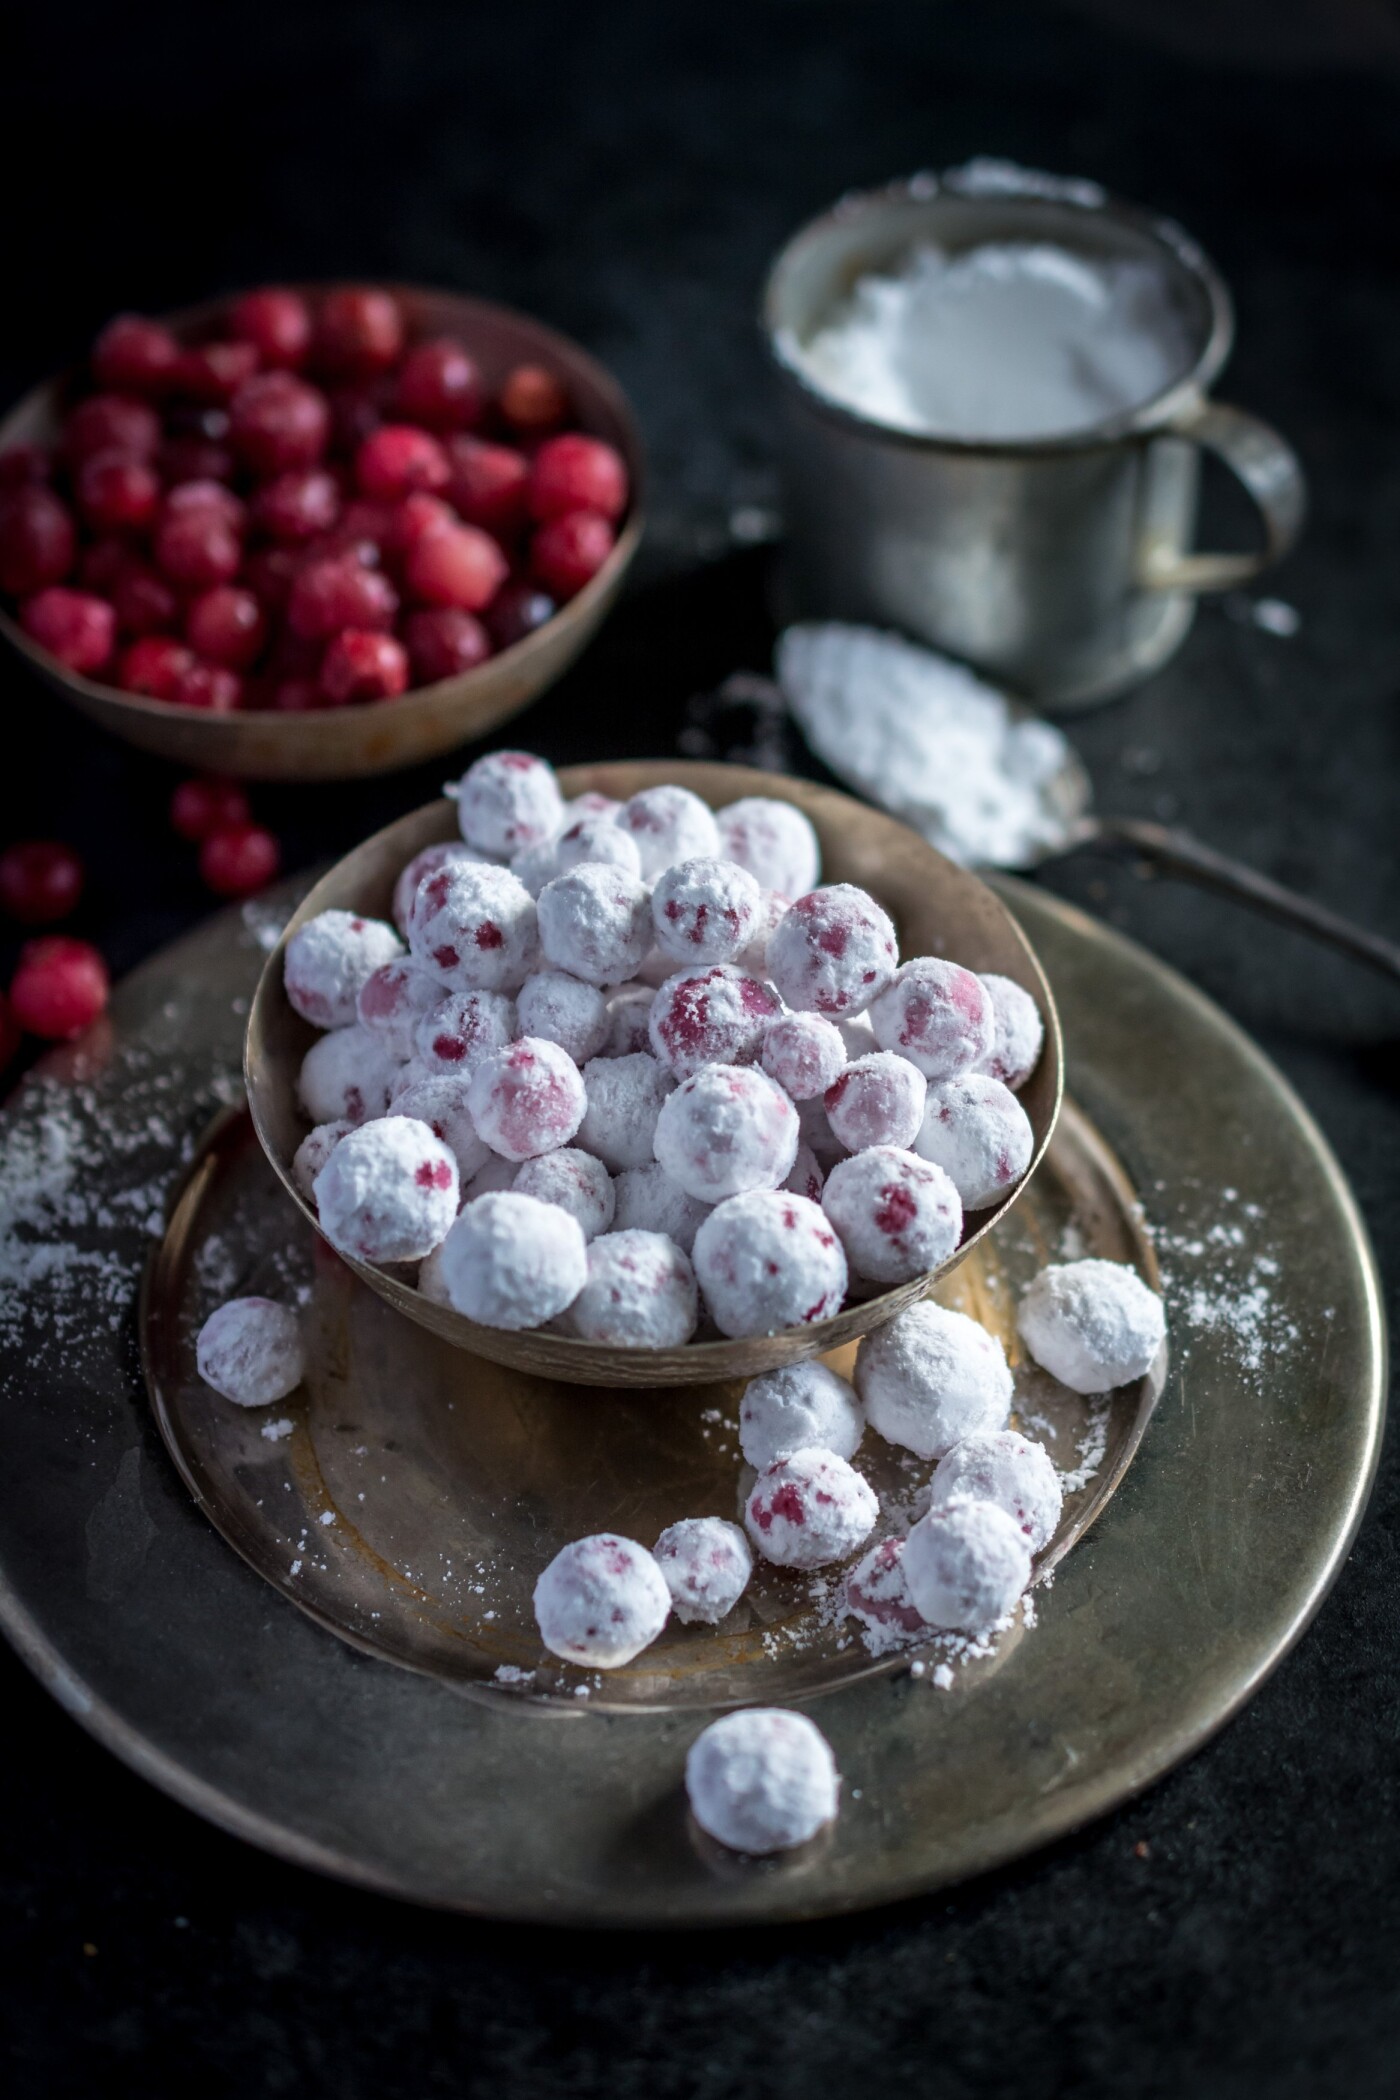 The cranberries were picked by myself last autumn in the swamps close by my parents’ place in the countryside. The cranberry ”candies” are a simple delight that my grandmother used to make. The icing sugar on the icy cranberries creates a wonderful balance of tastes.